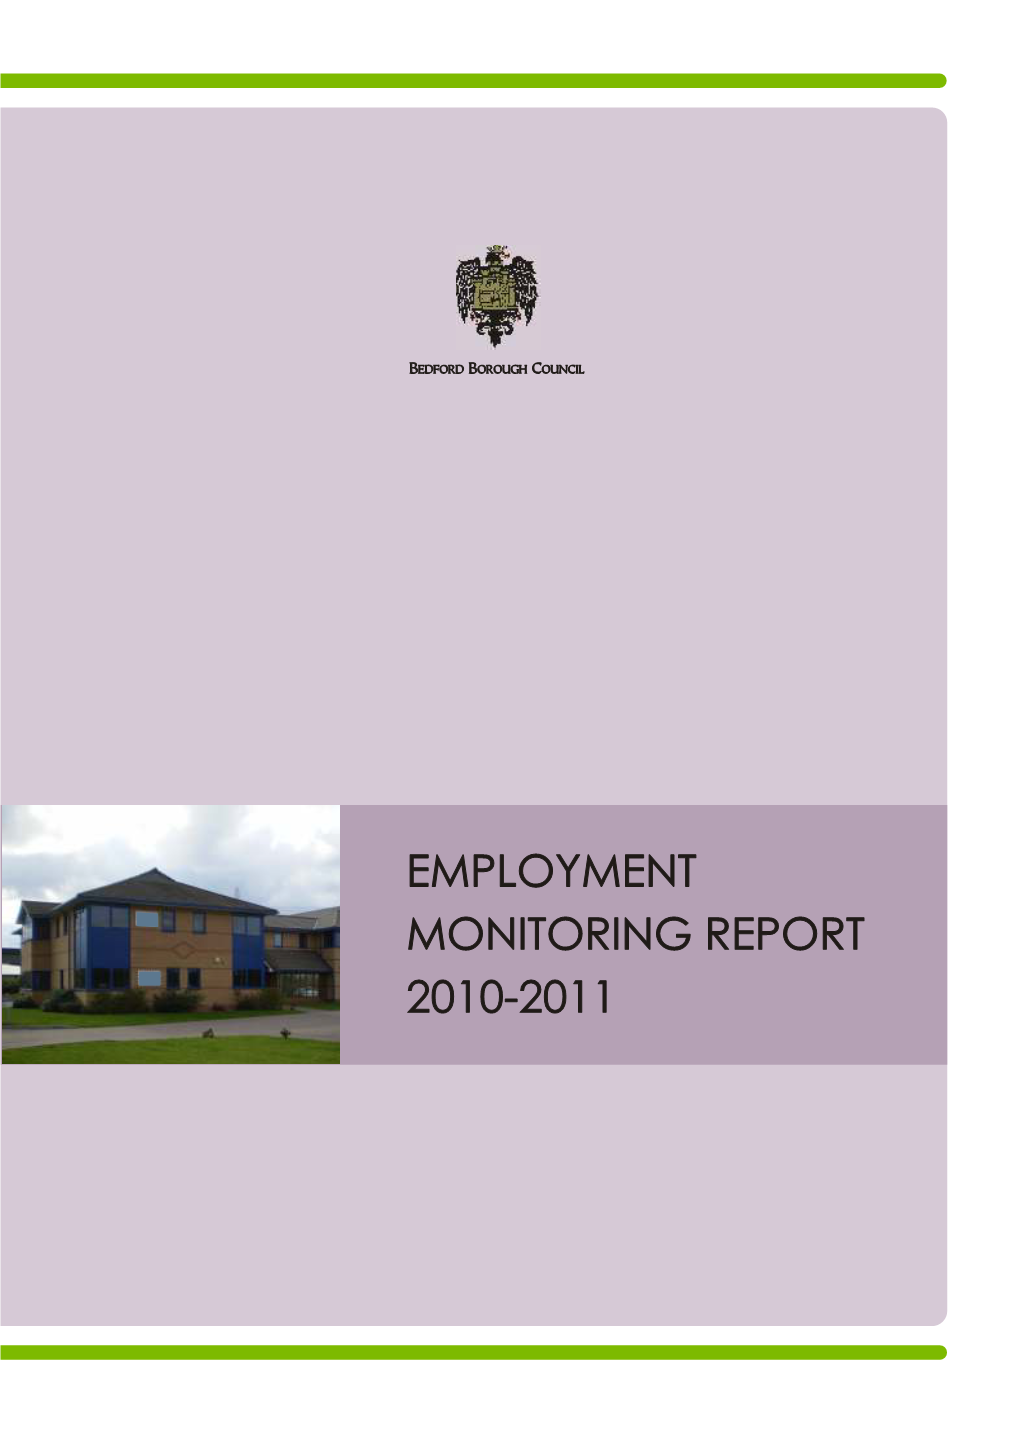 Employment Monitoring Report (2010-11)